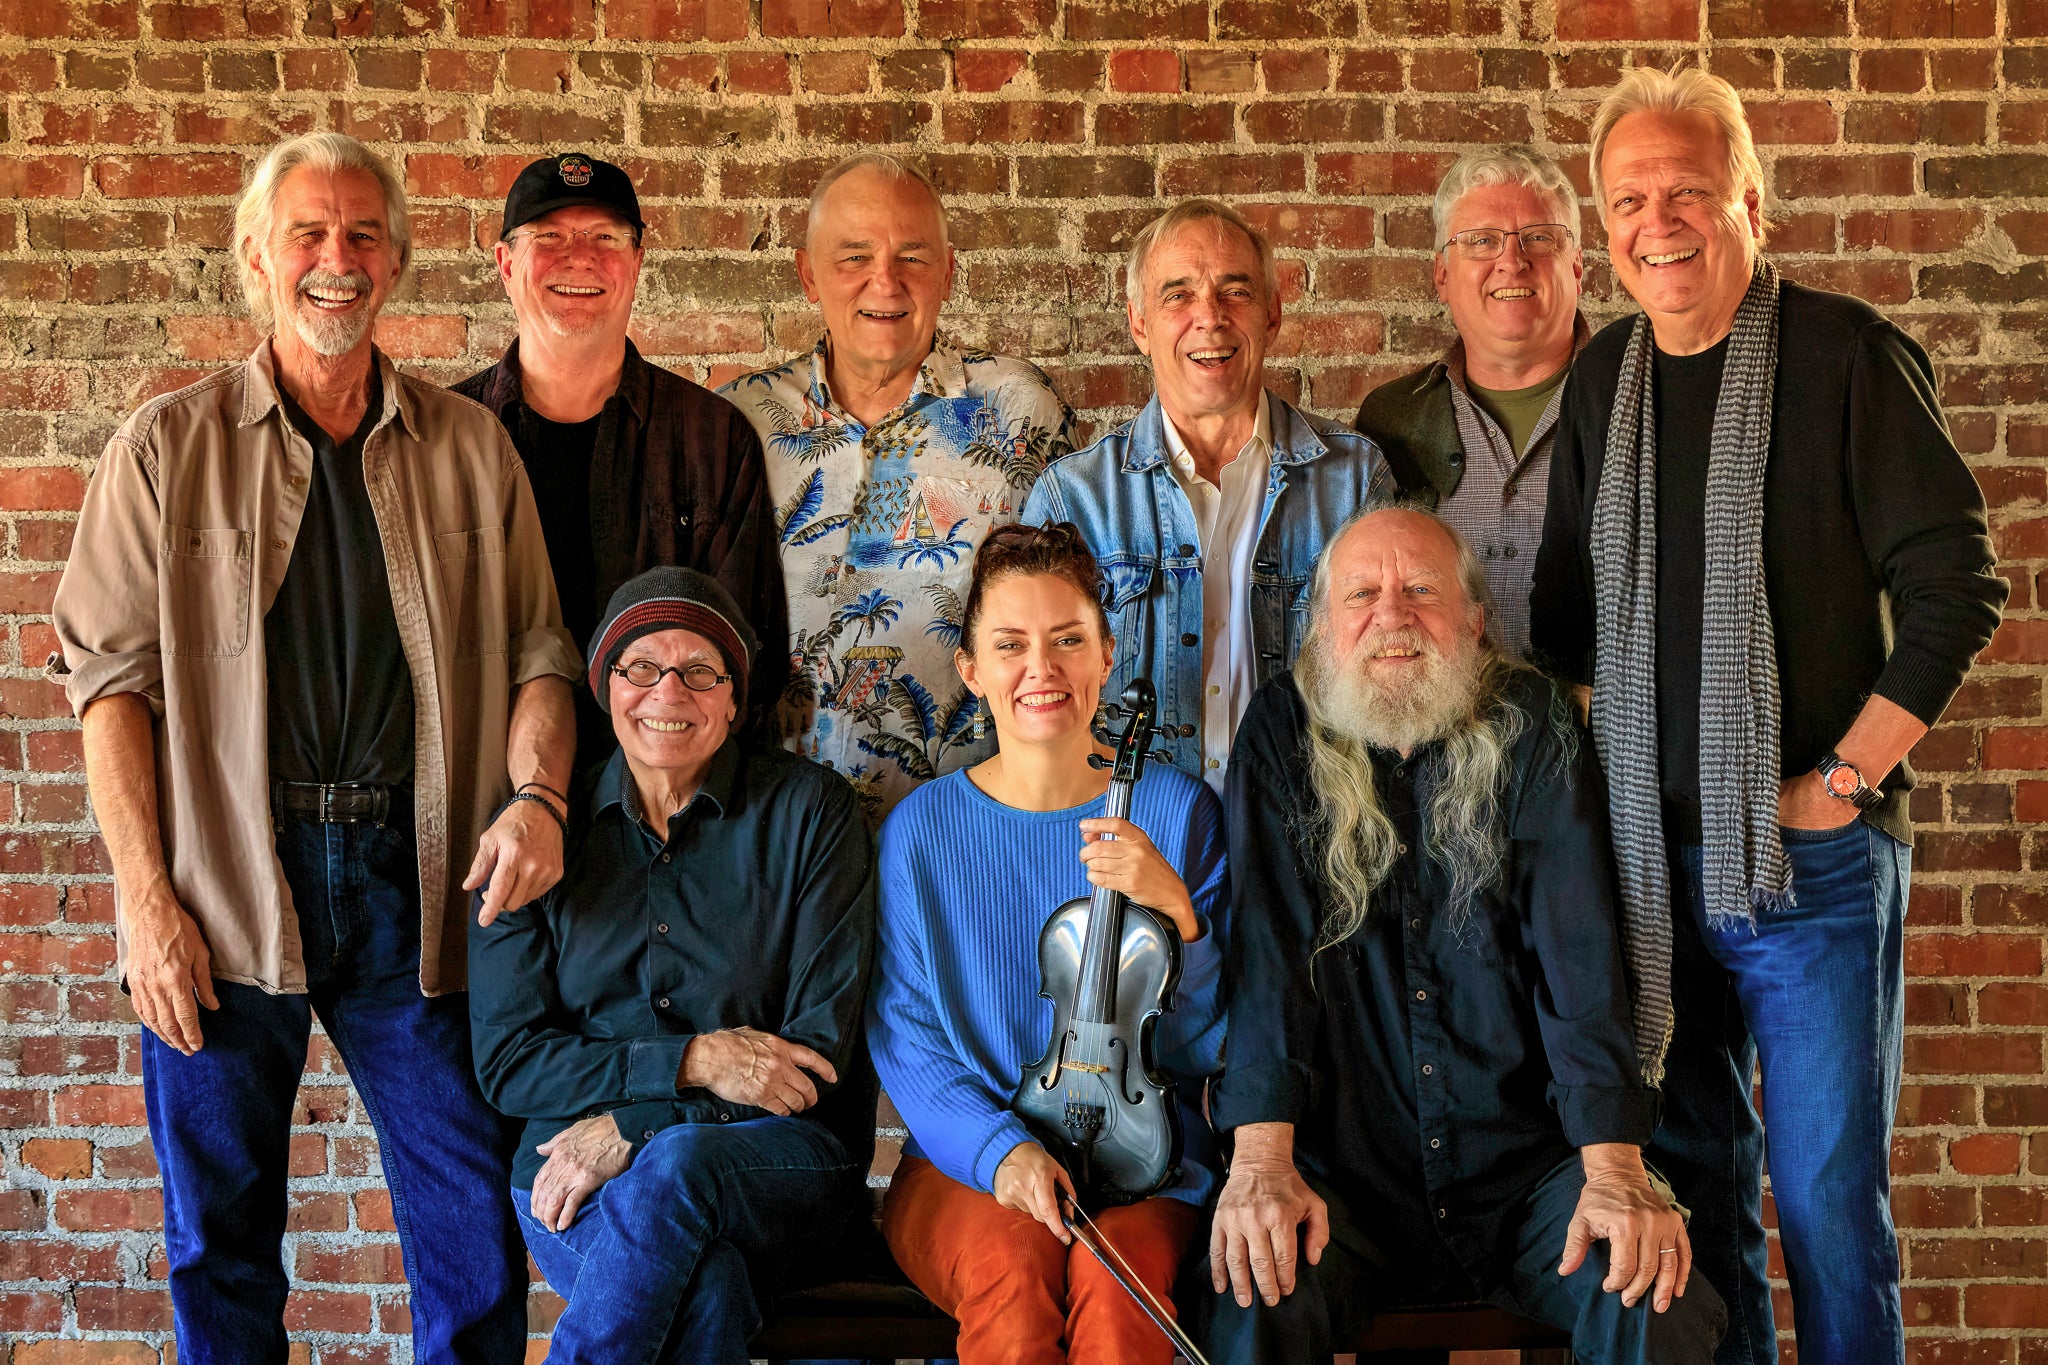 members only presale password for Ozark Mountain Daredevils: When It Shines: The Final Tour tickets in Akron